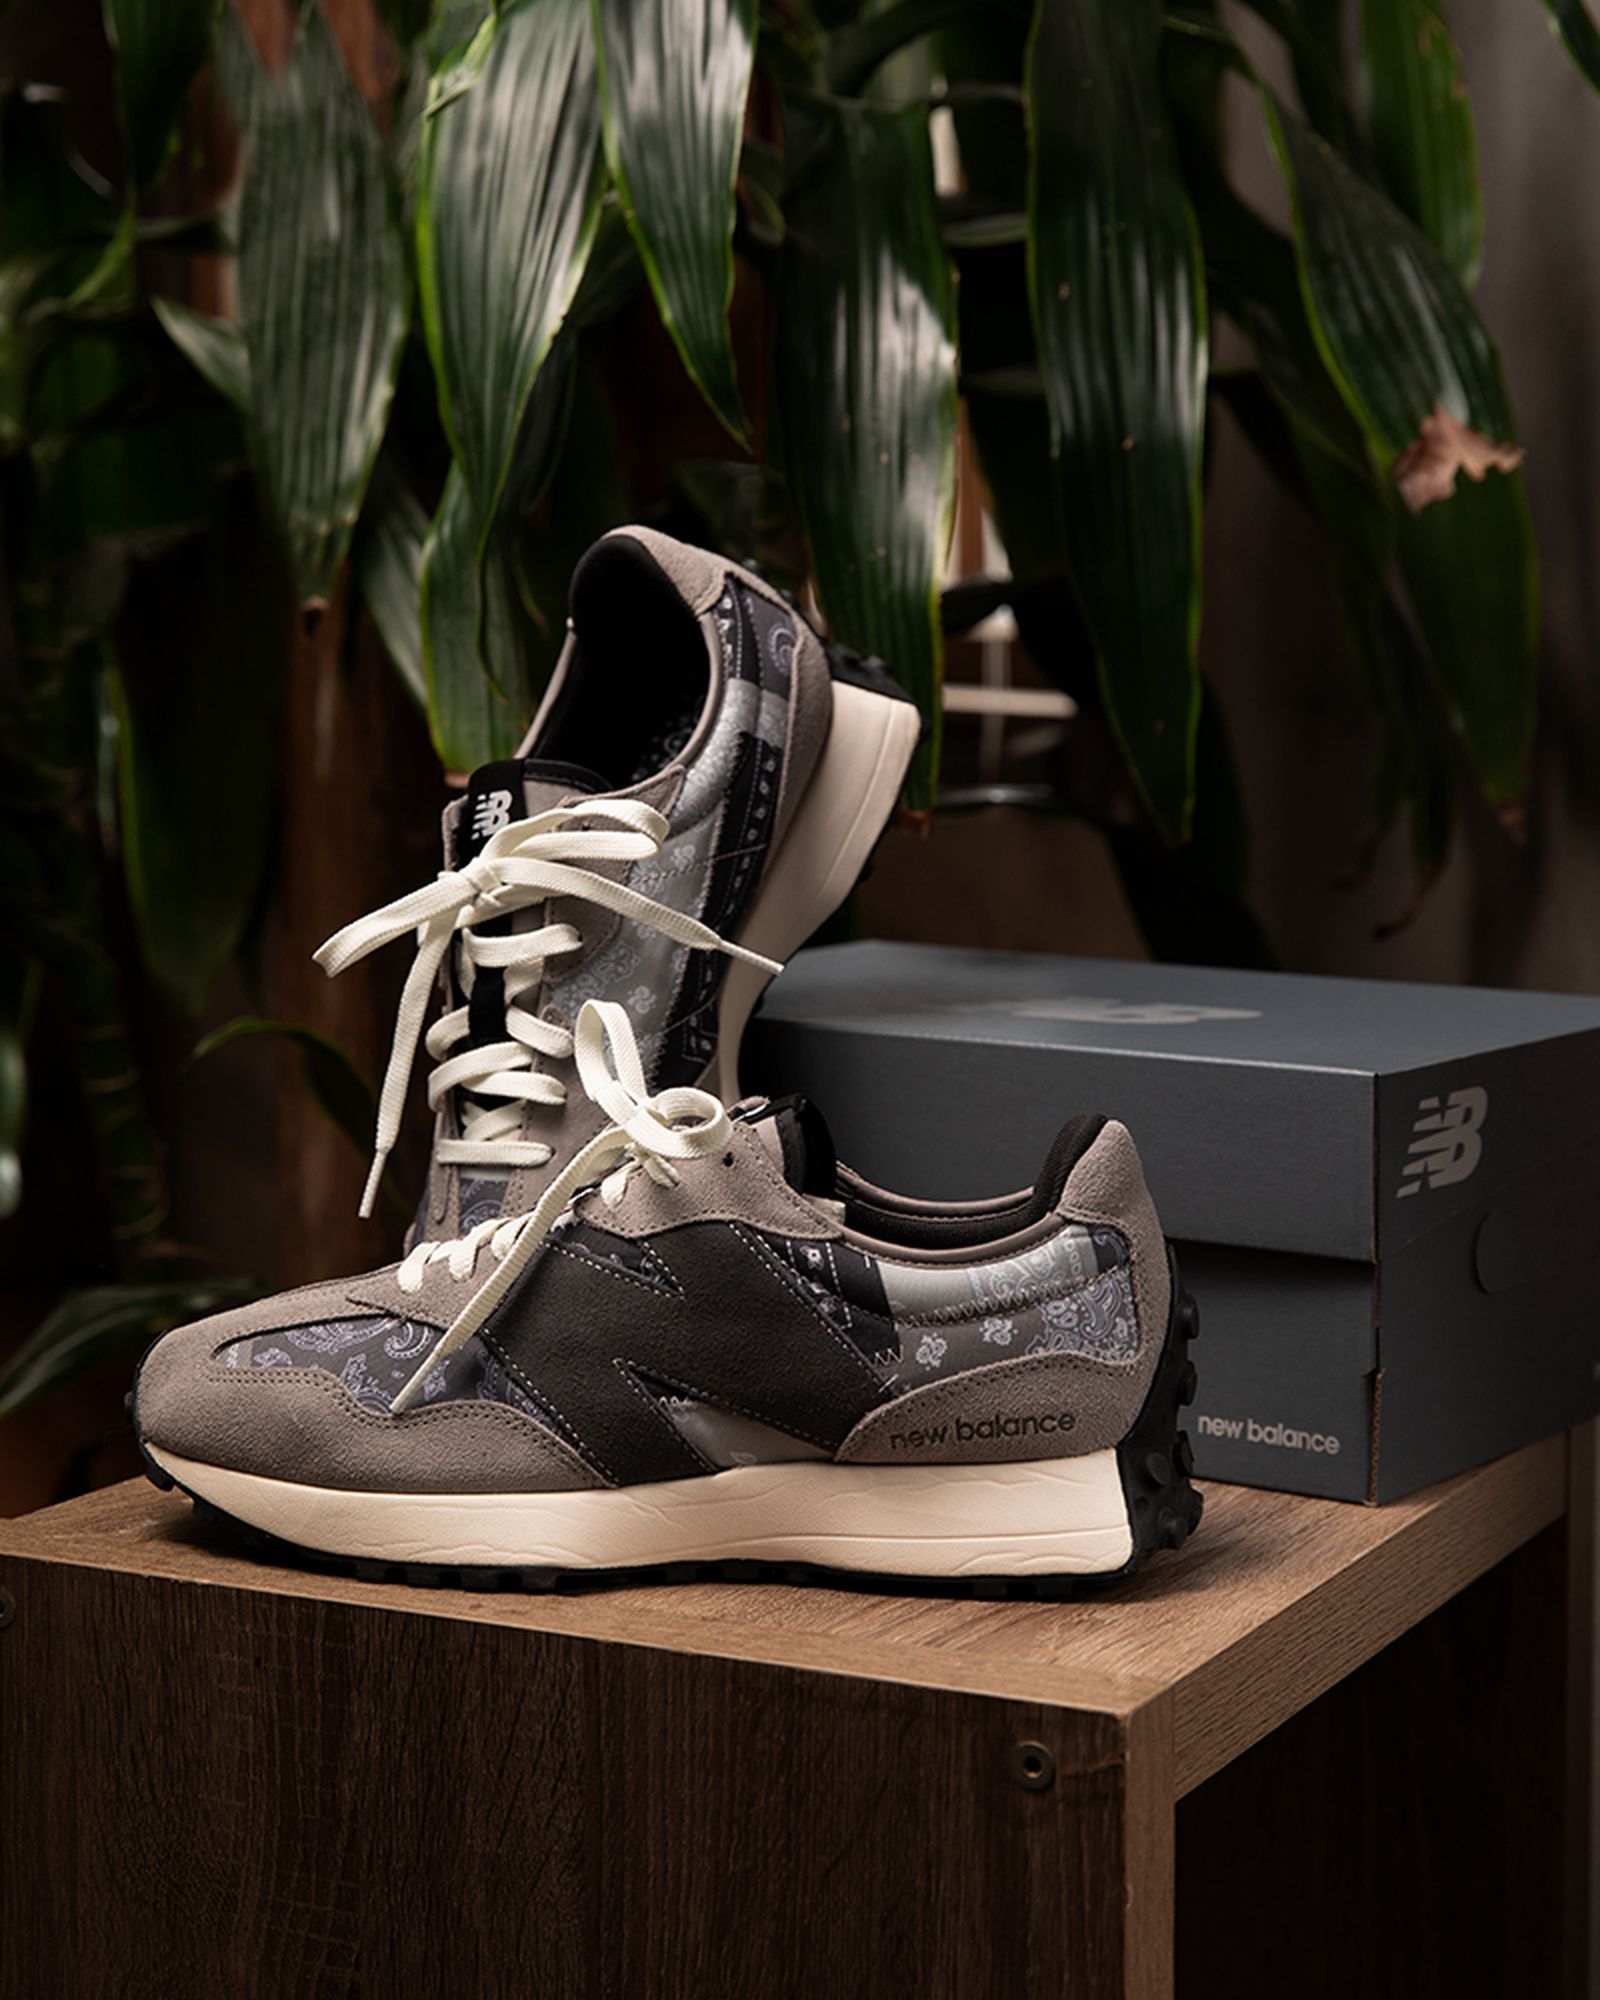 shoe-palace-new-balance-327-unity-release-date-price-08